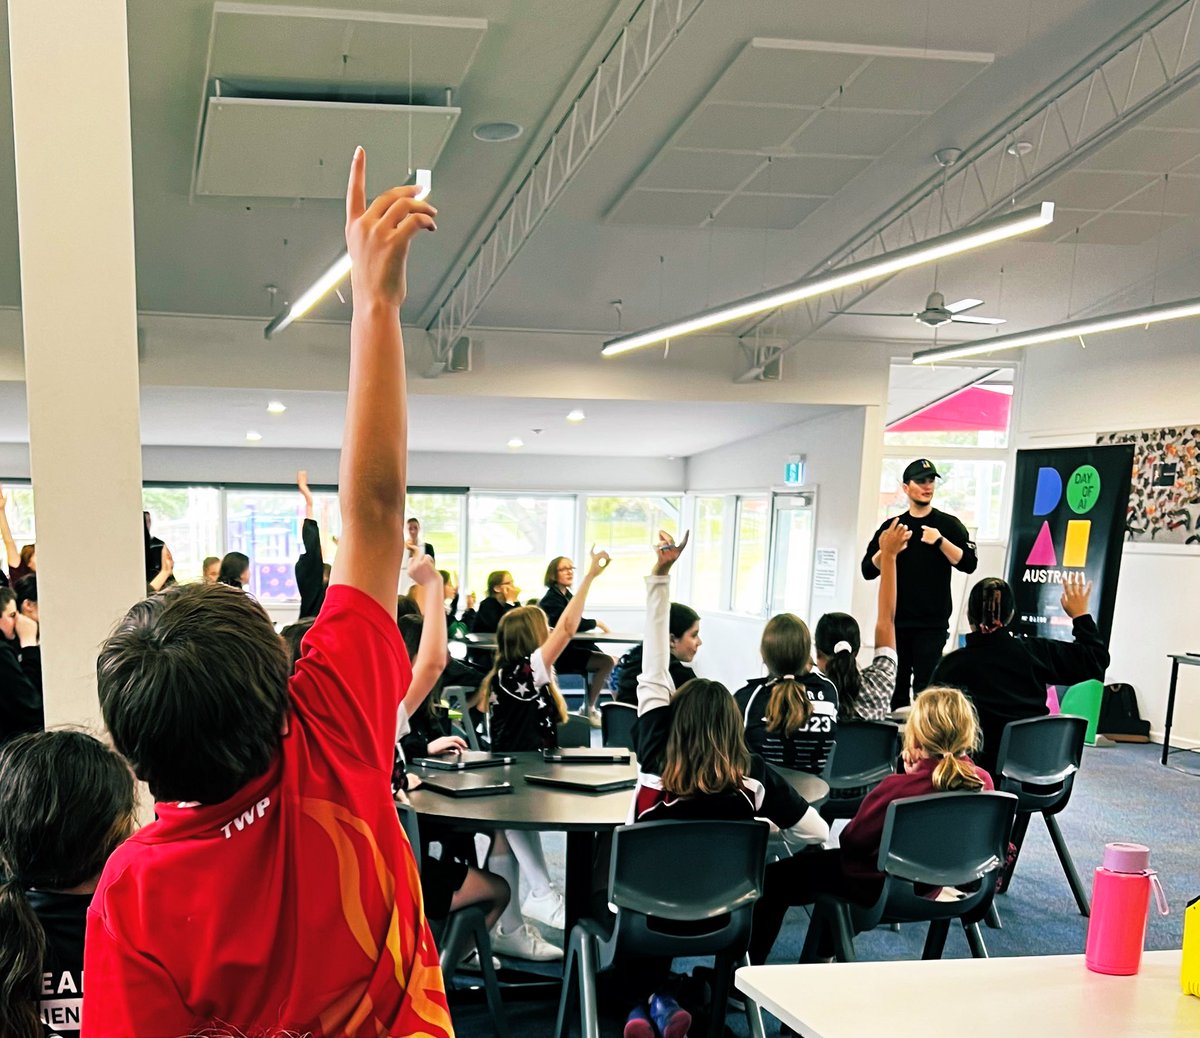 Today 85,000 students across Australia participated in Day of AI. A day to learn what #AI is, how it’s made, the opportunities and risks. Some may choose tech careers, but all need AI understanding to safely navigate our technological world. #AIAustralia #STEM @DayofAIAustral1